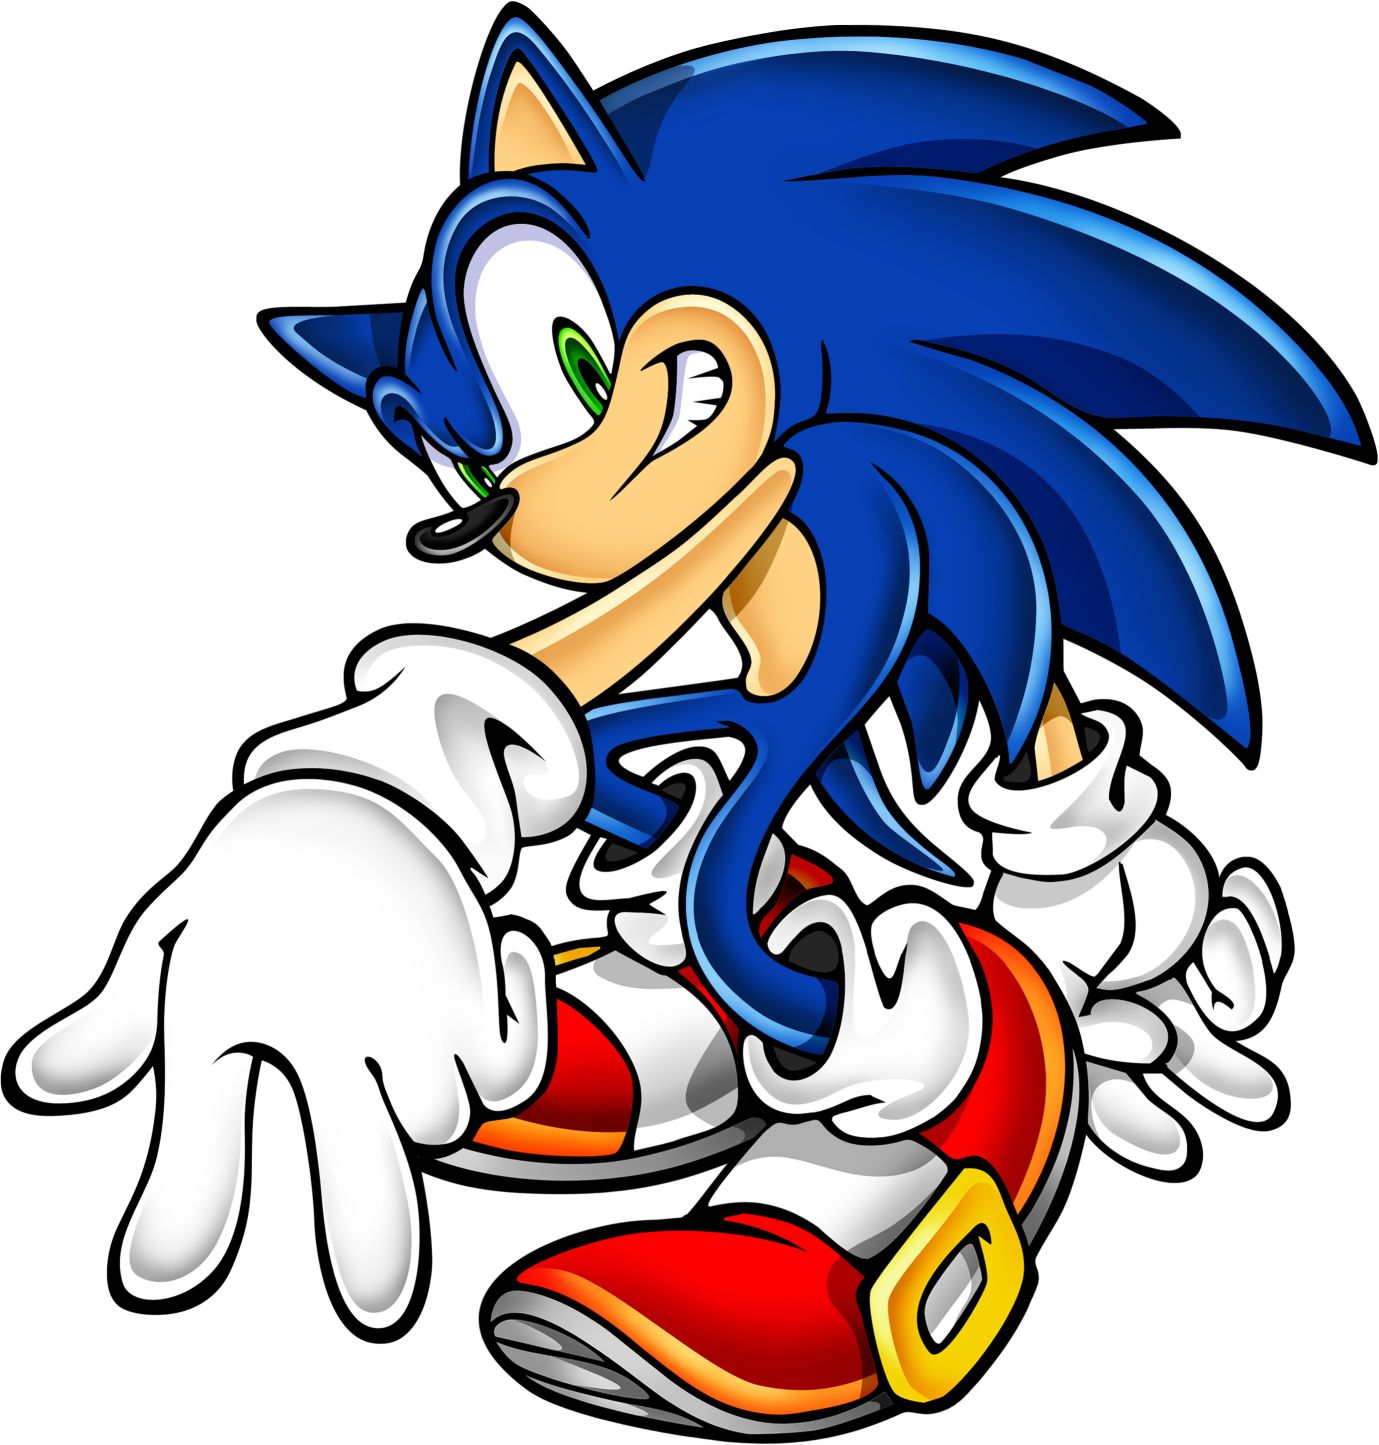 Sonic the Hedgehog 4: Episode 3, Sonic Fanon Wiki